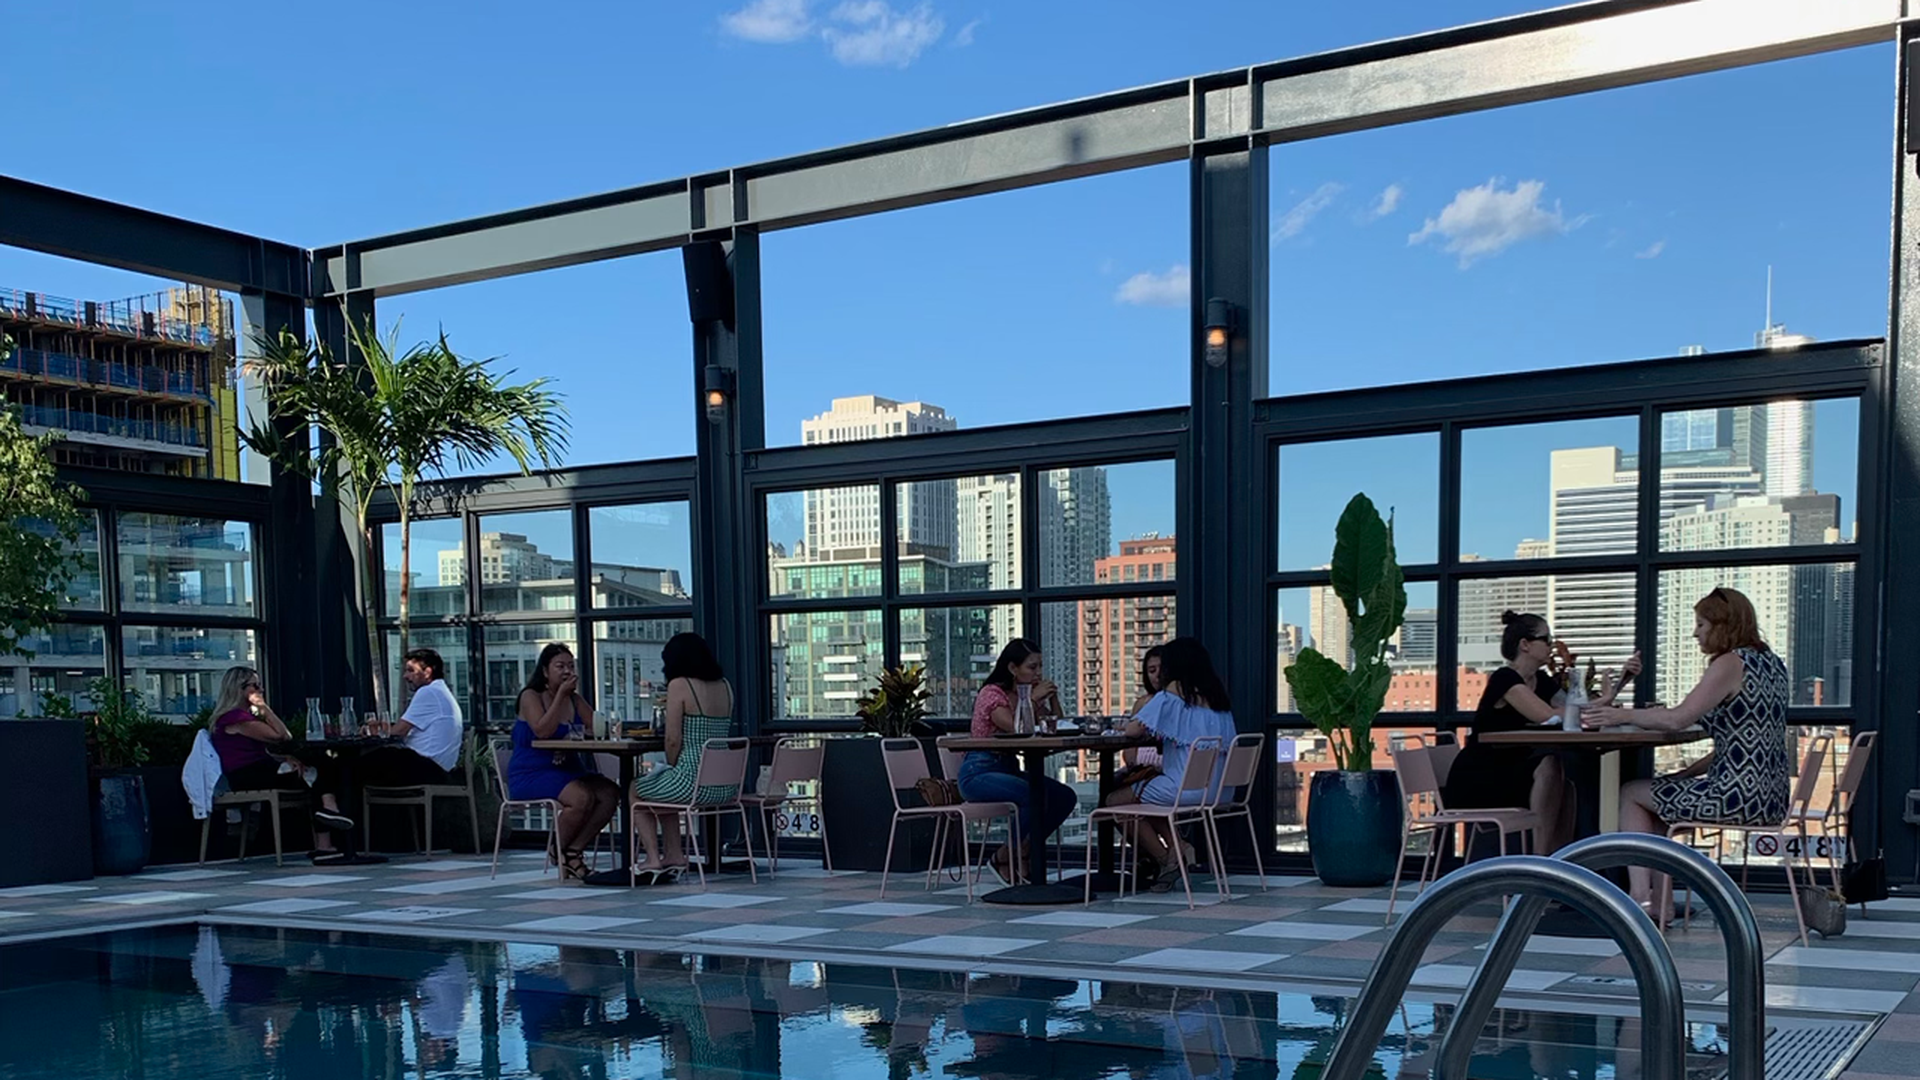 People dine at a rooftop restaurant with a pool